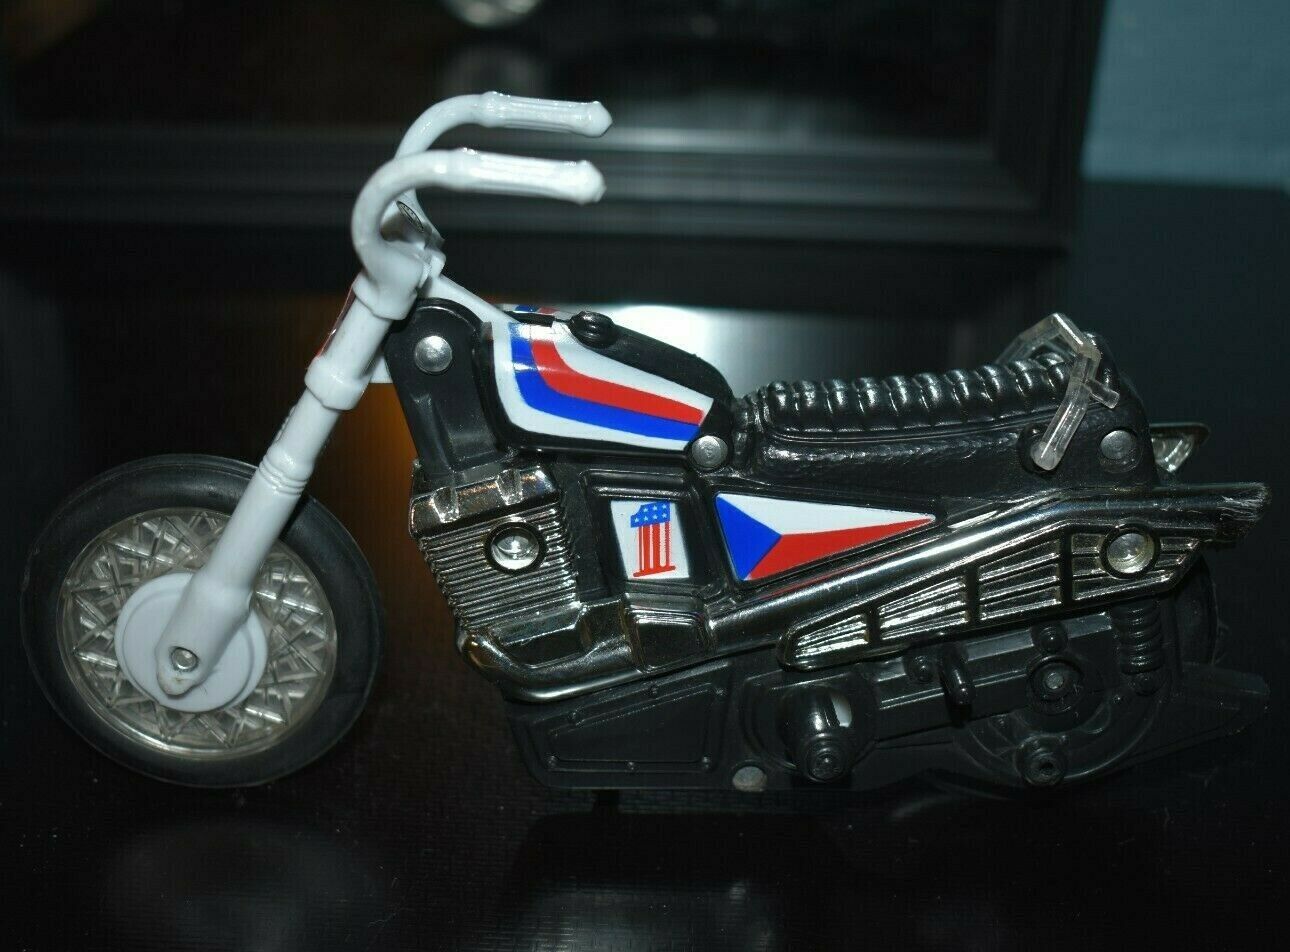 Evil Knievel Promotional Friction Toy Harley Davidson Motorcycle 2020 Repro